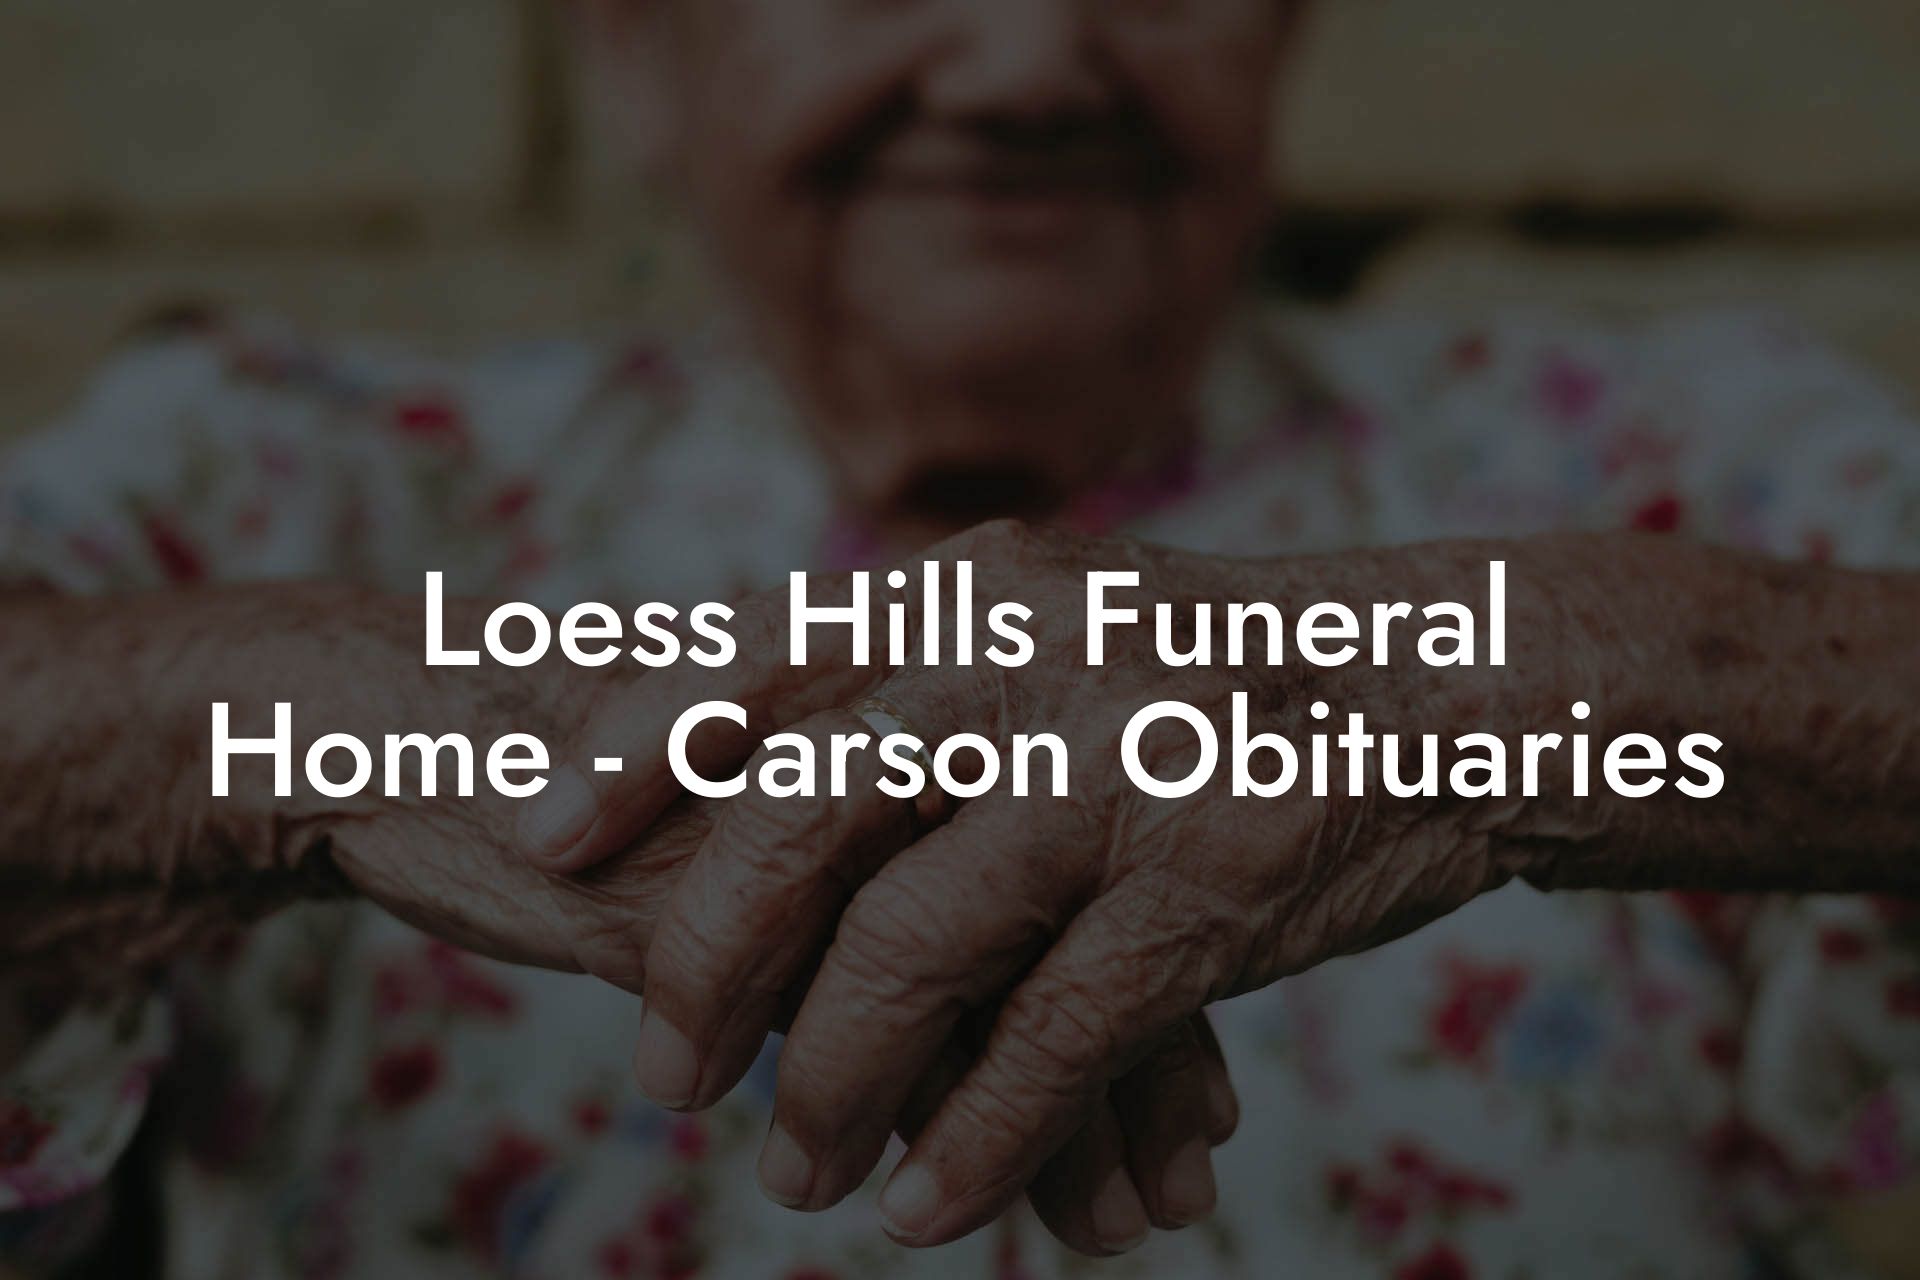 Loess Hills Funeral Home - Carson Obituaries